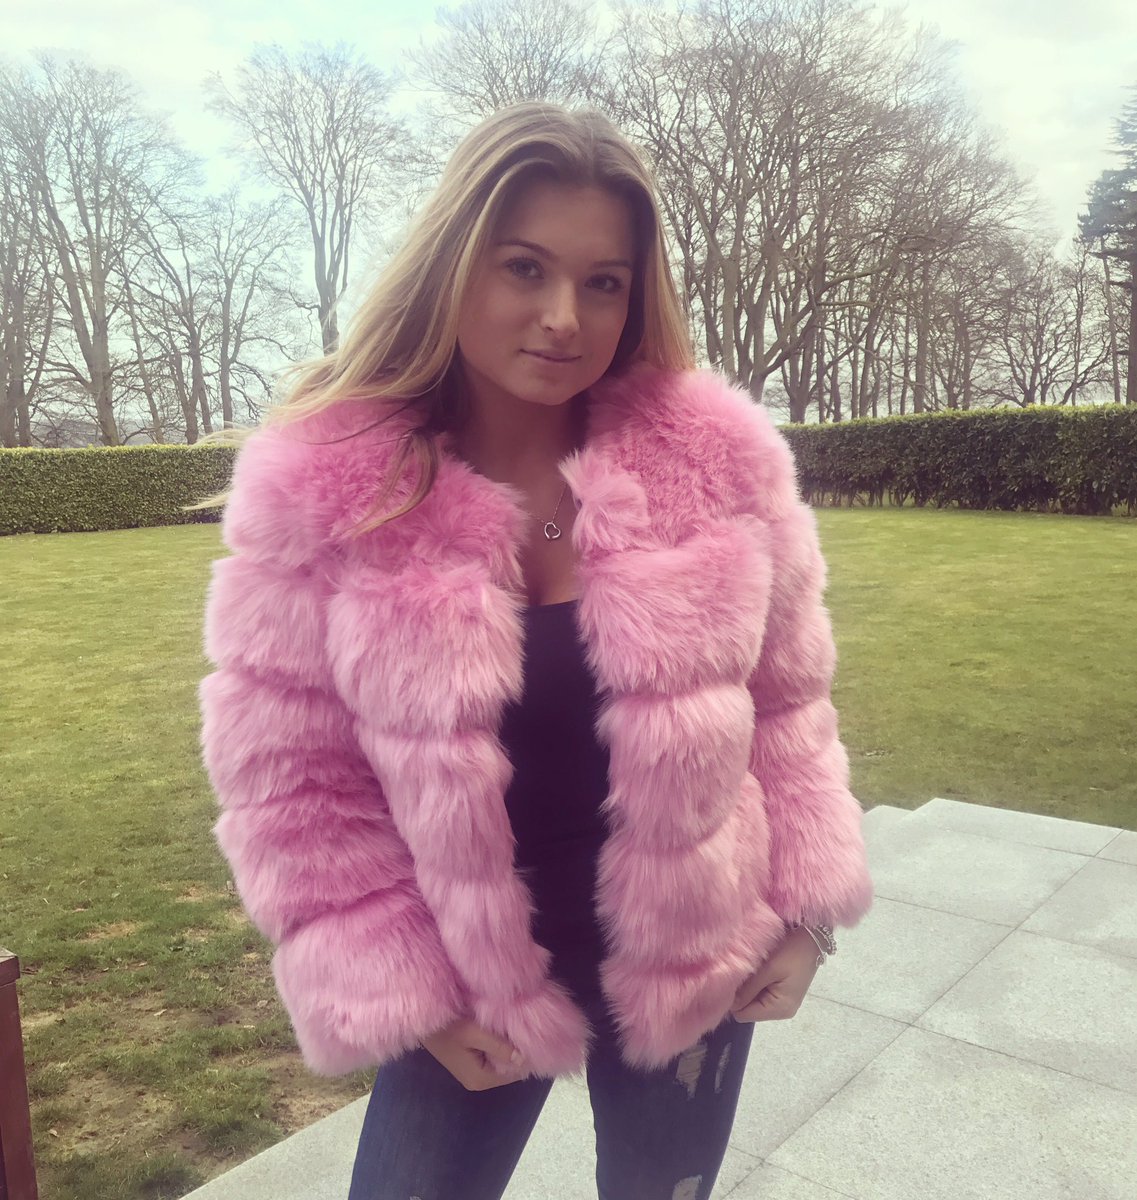 Reporting From The Fox Tower: Wallpaper of the Week: Zara Holland